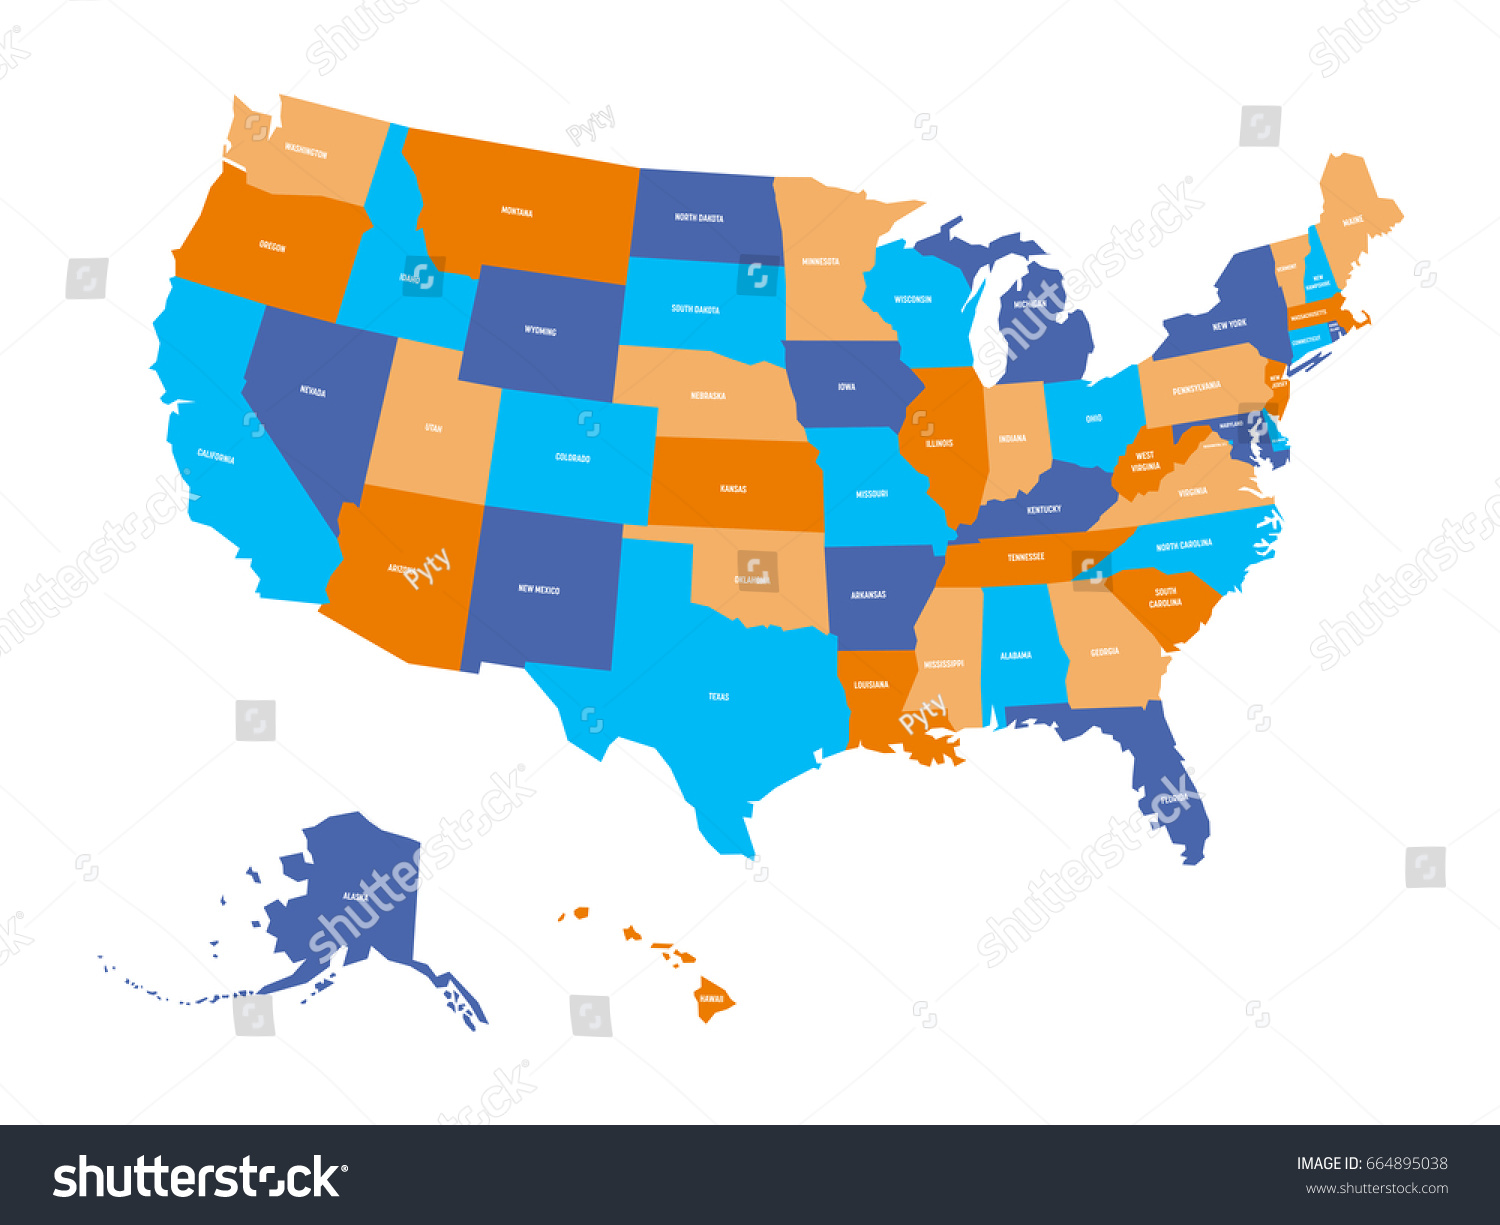 political-map-usa-united-states-america-stock-vector-royalty-free